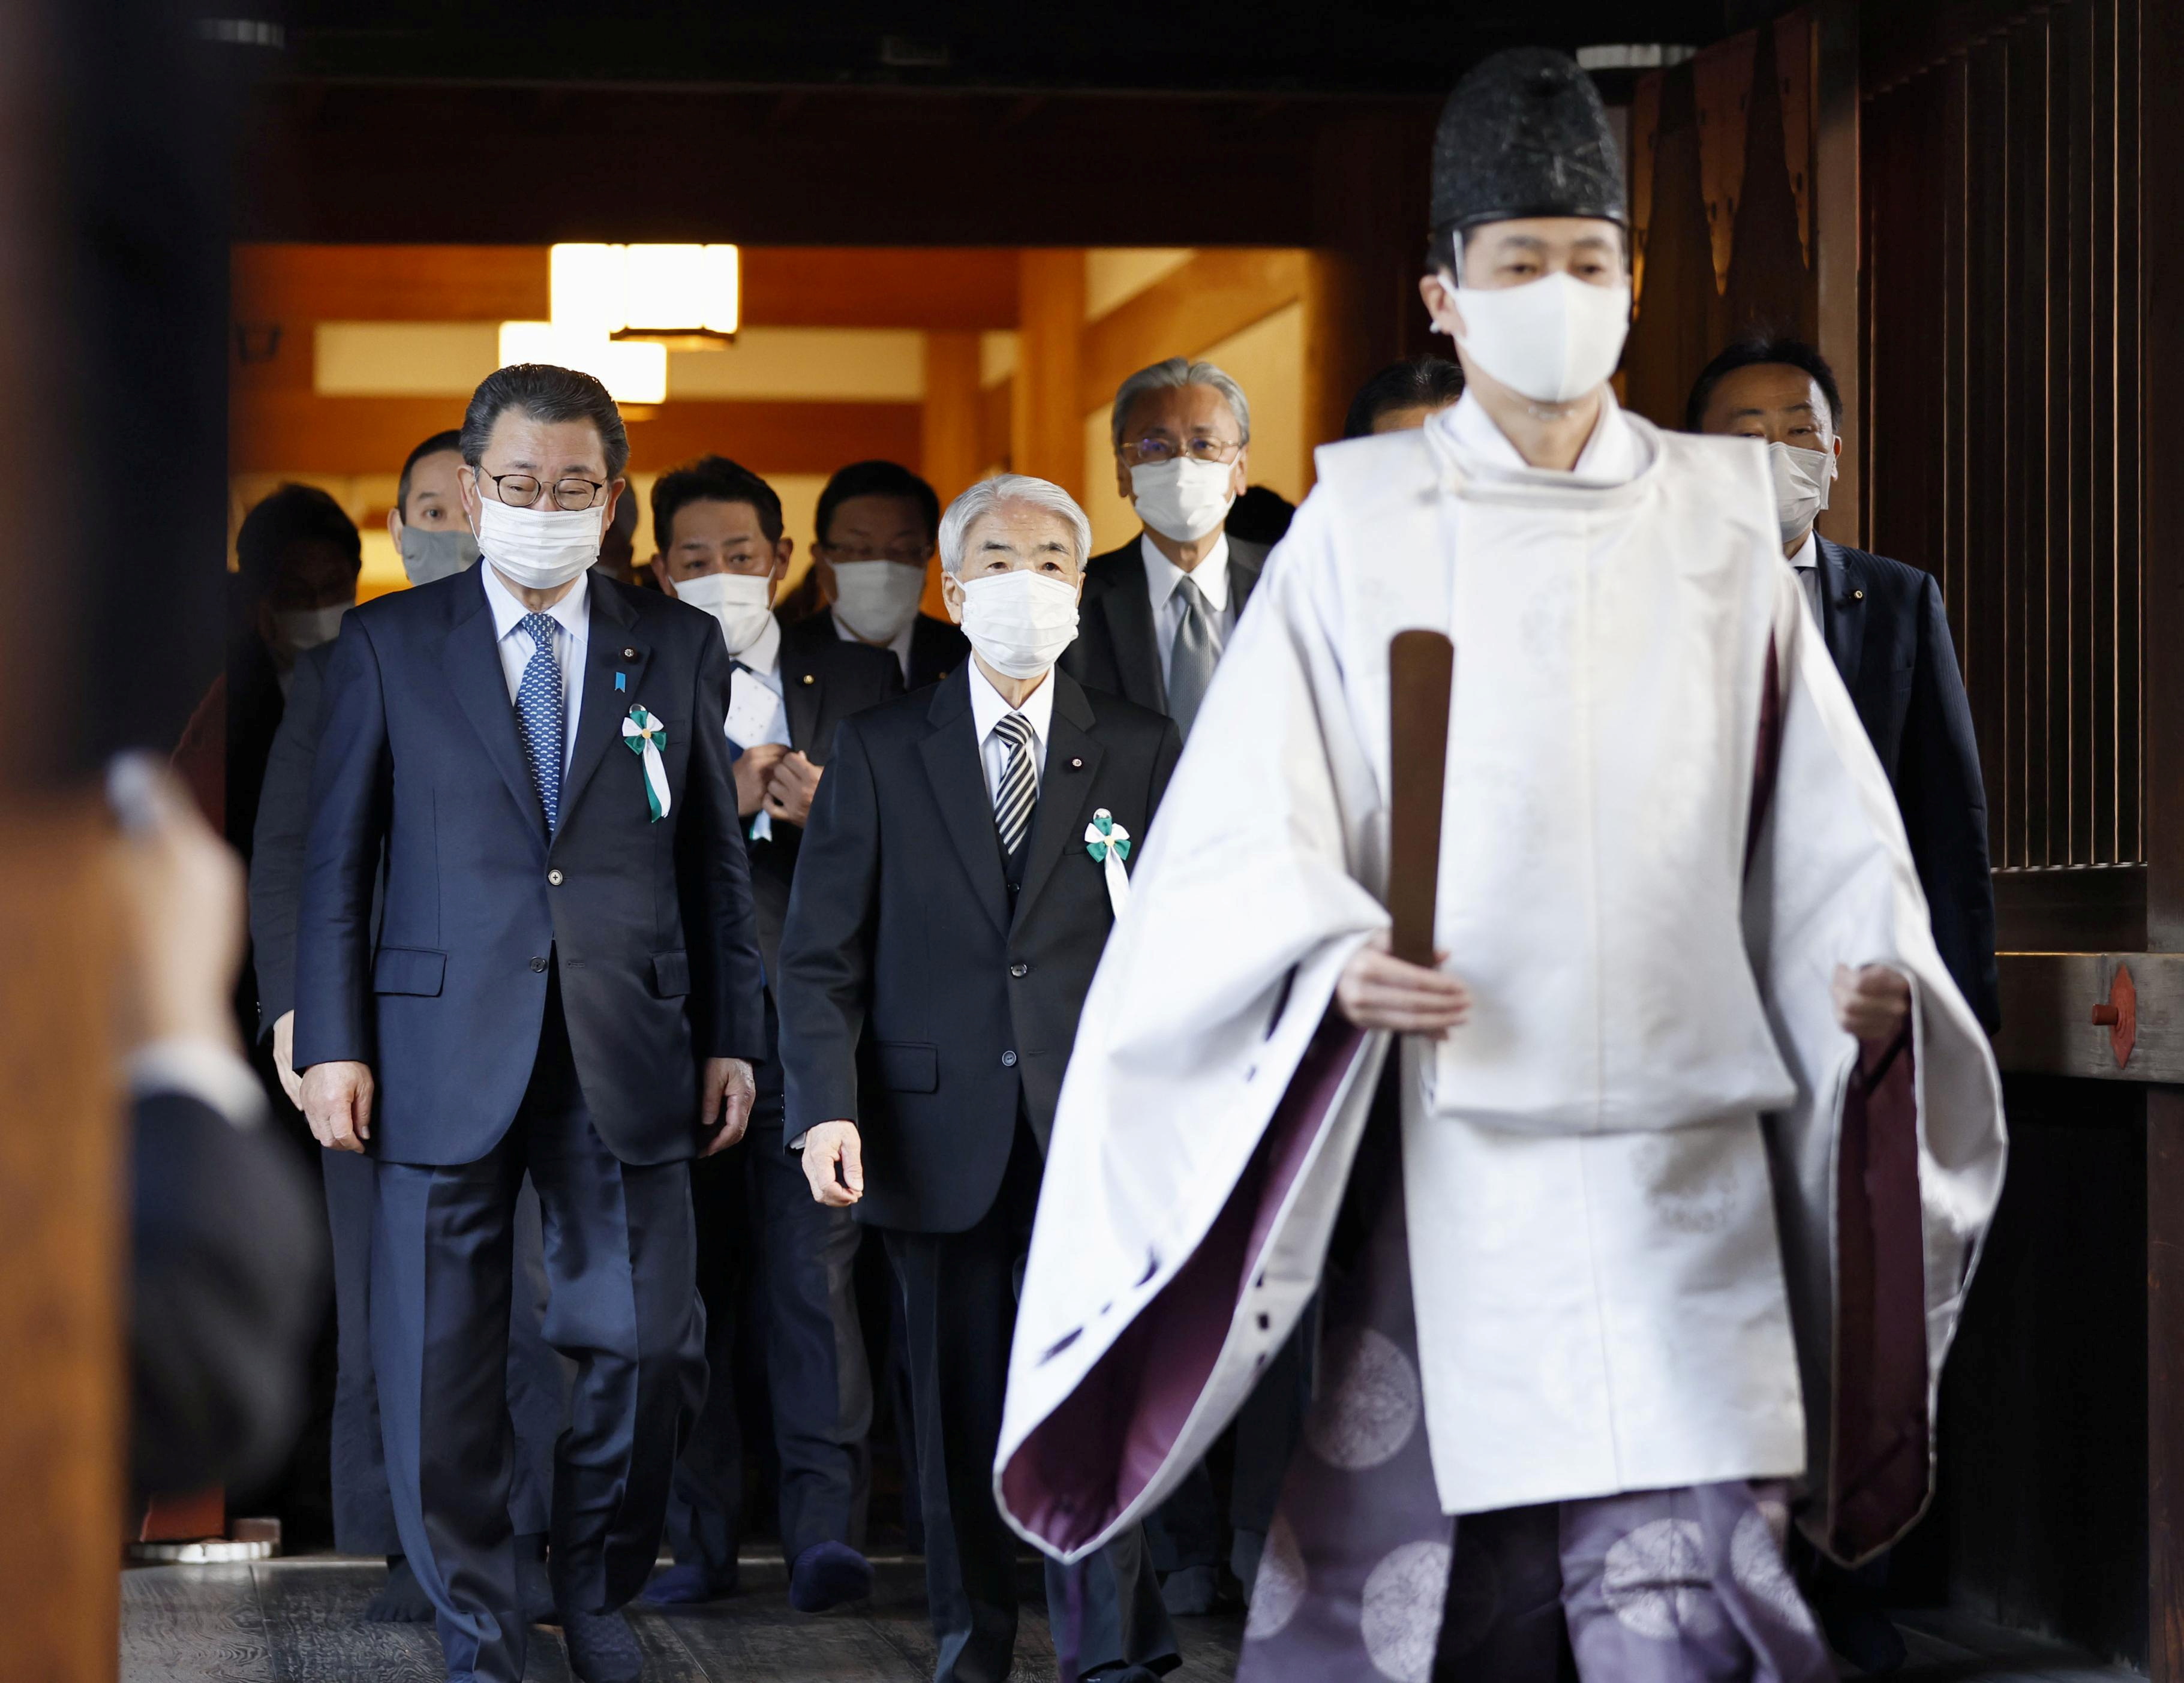 A Shinto priest accompanies a group of Japanese lawmakers as they visit the Yasukuni shrine to pay respects to the country's war dead in Tokyo, Japan December 7, 2021, in this photo taken by Kyodo. Mandatory credit Kyodo/via REUTERS 